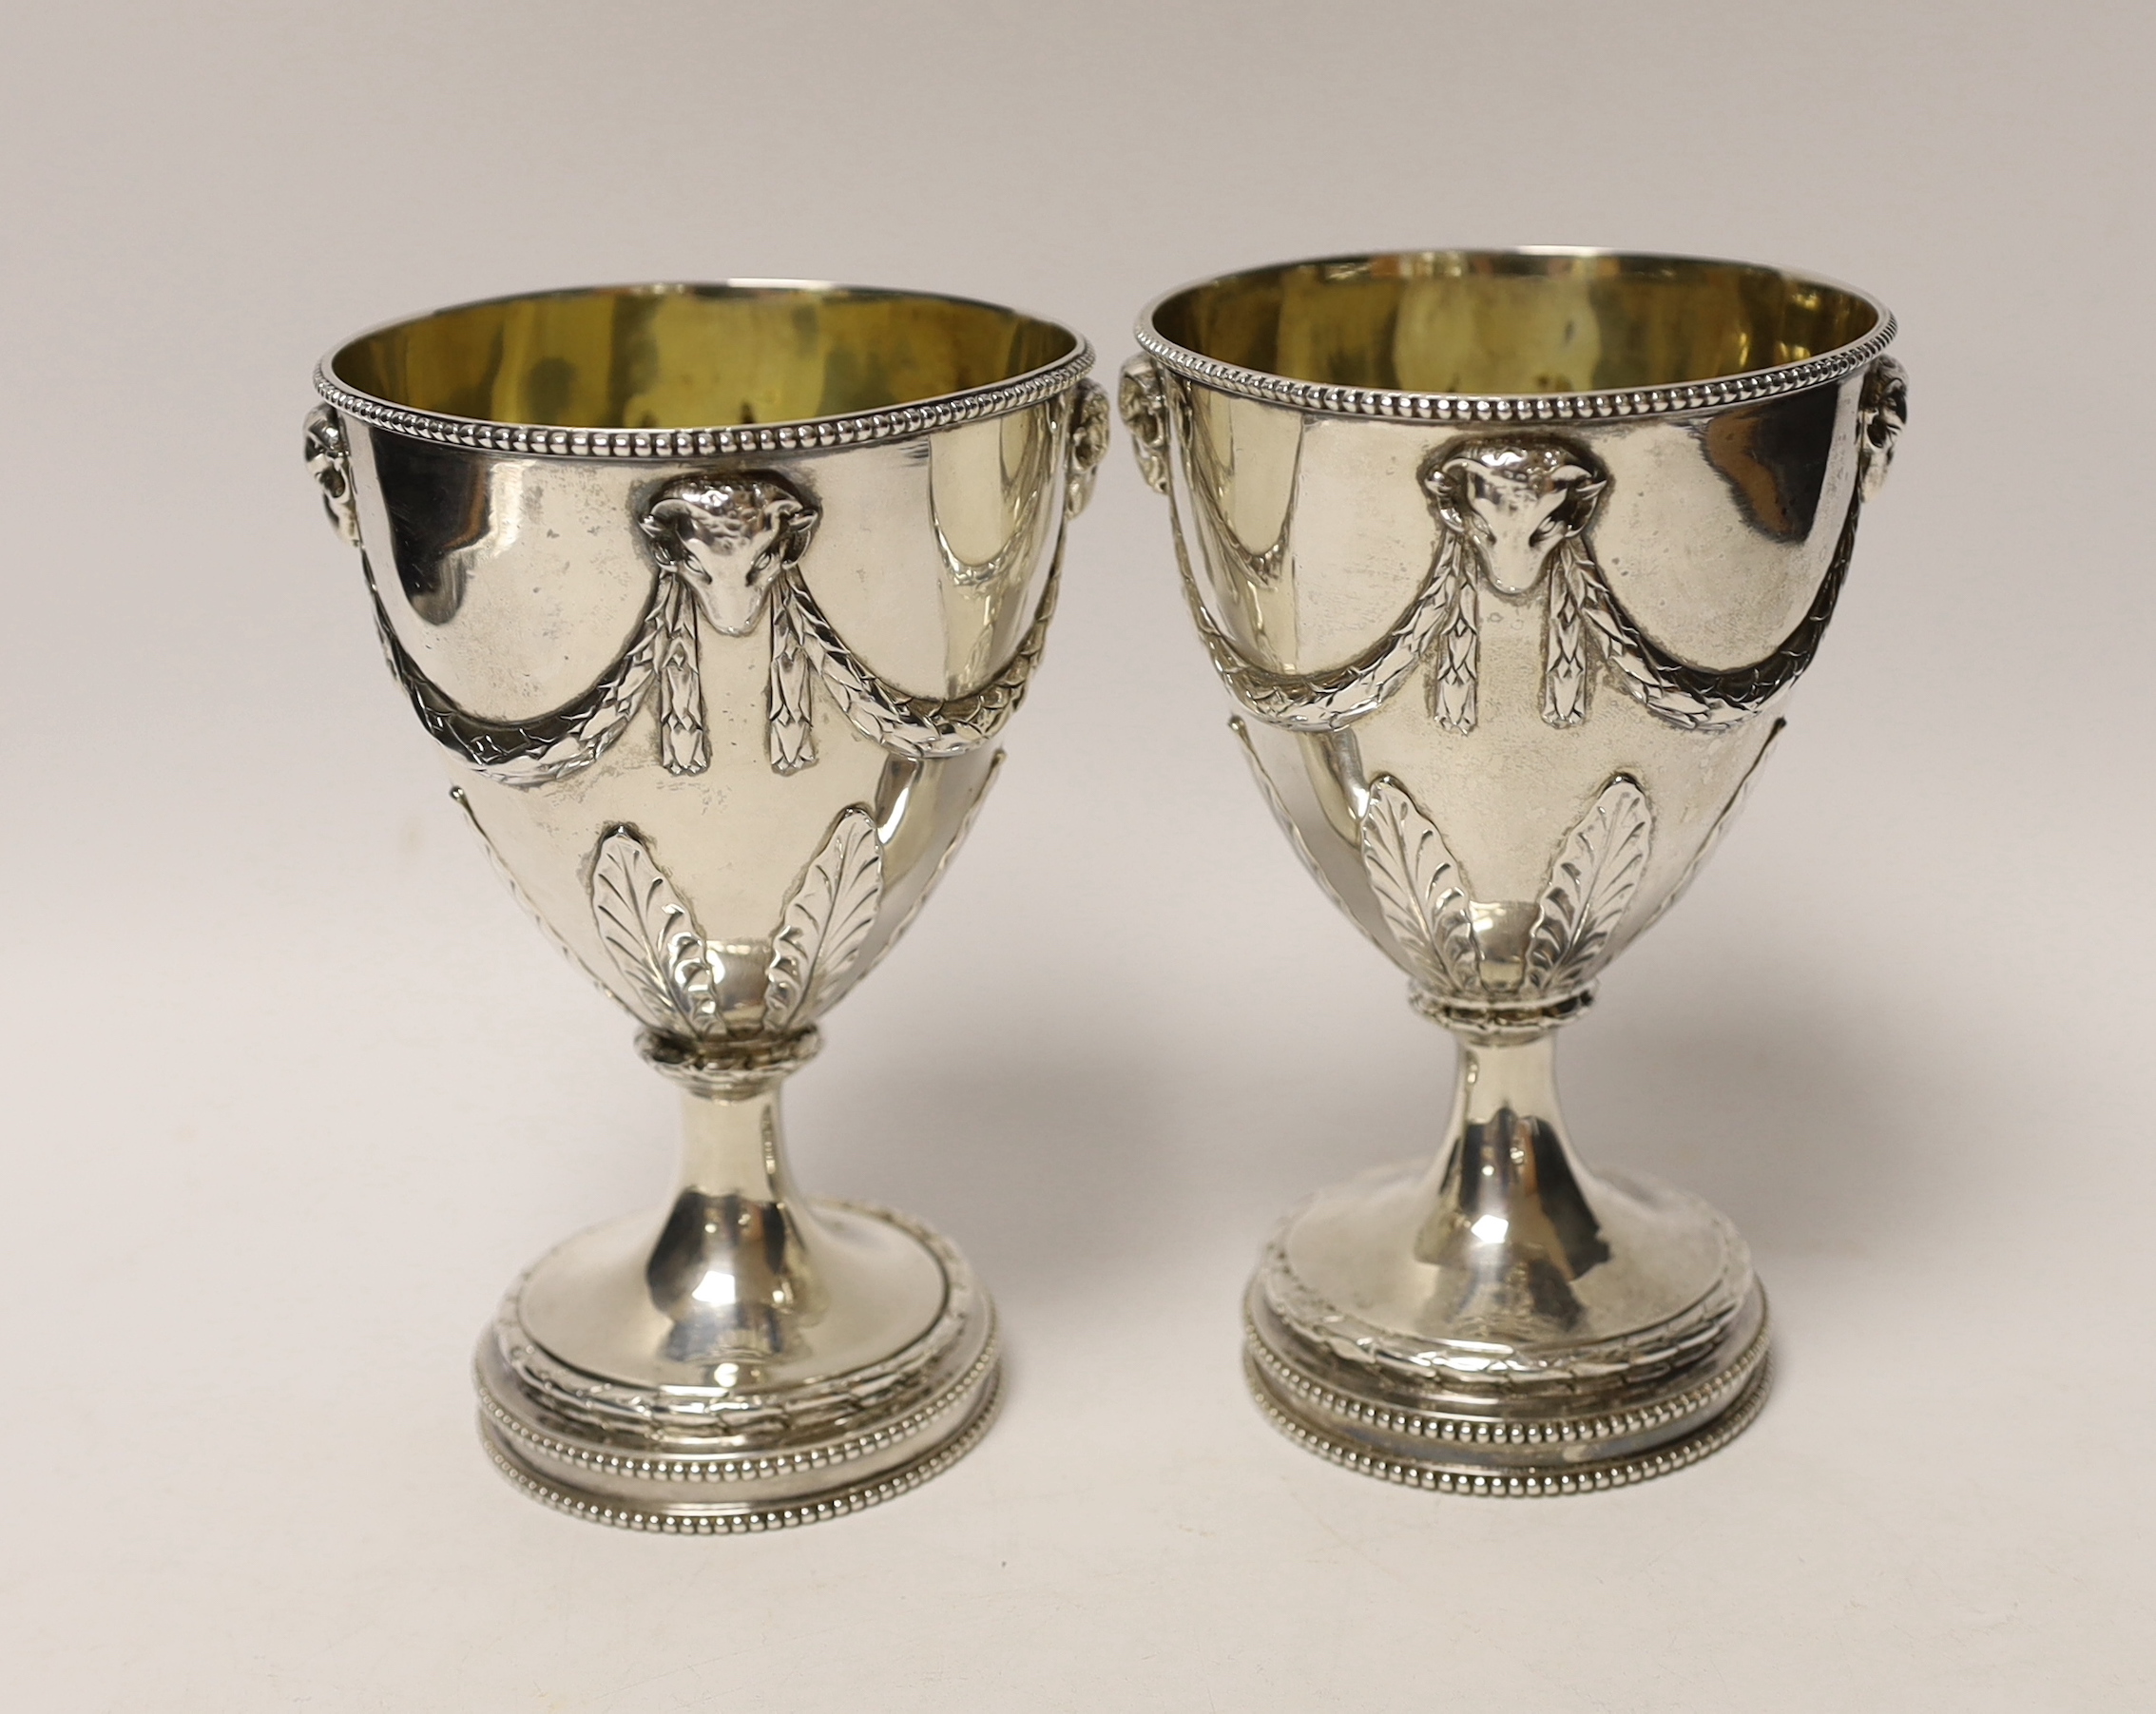 A pair of late George III silver goblets, with ram's head and swag decoration, maker H.G, London, 1816, 15.1cm, 16.3oz, with partly erased engraved inscriptions.